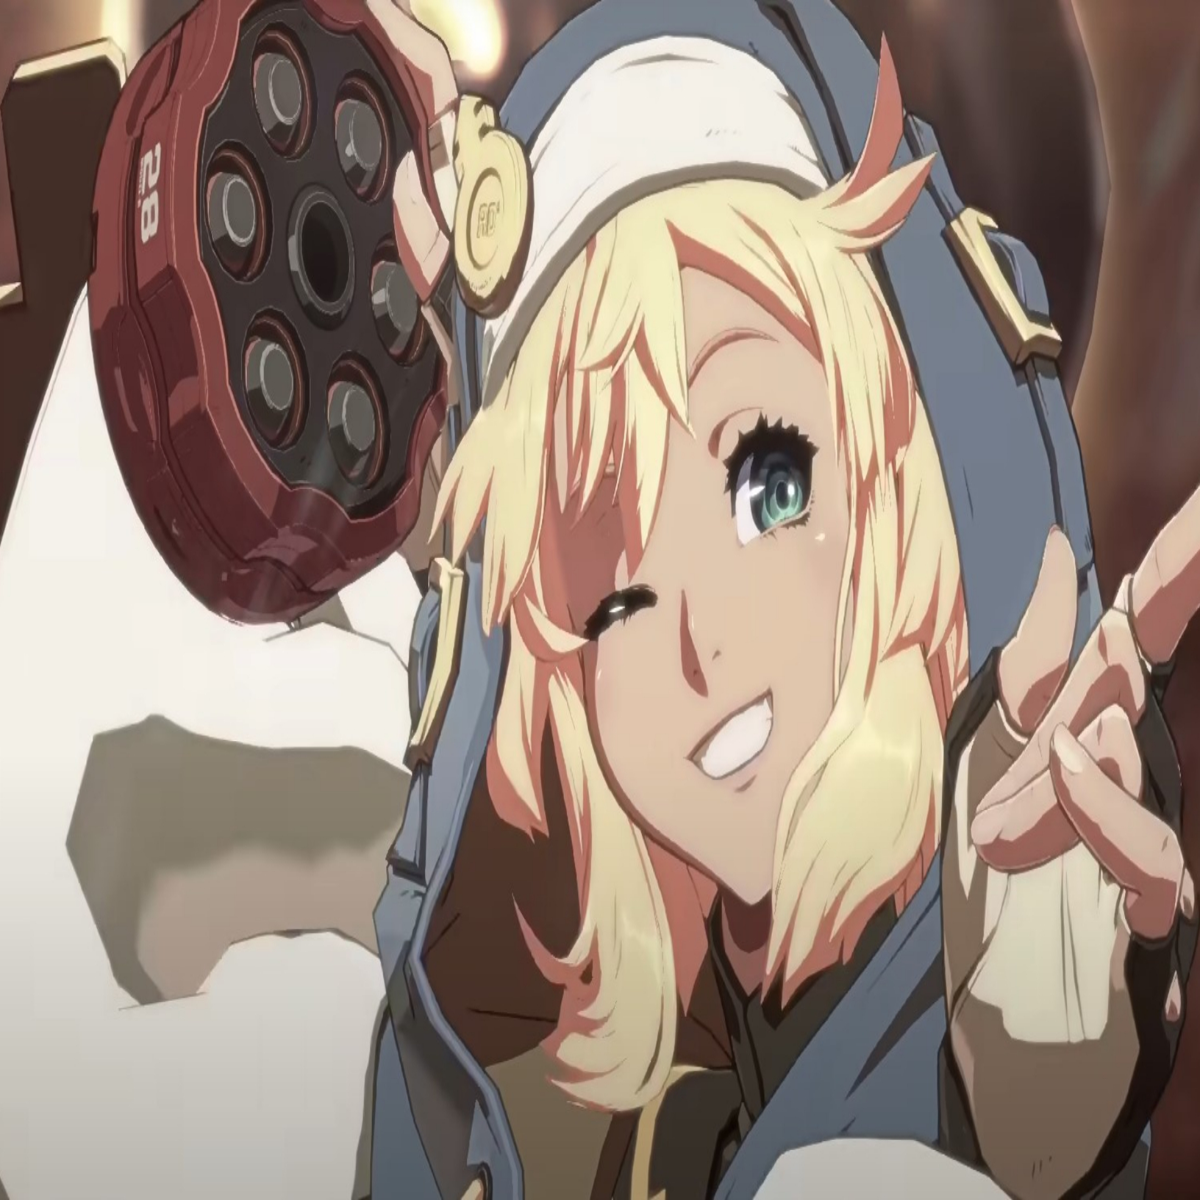 Bridget might be my favorite Guilty Gear Strive character now